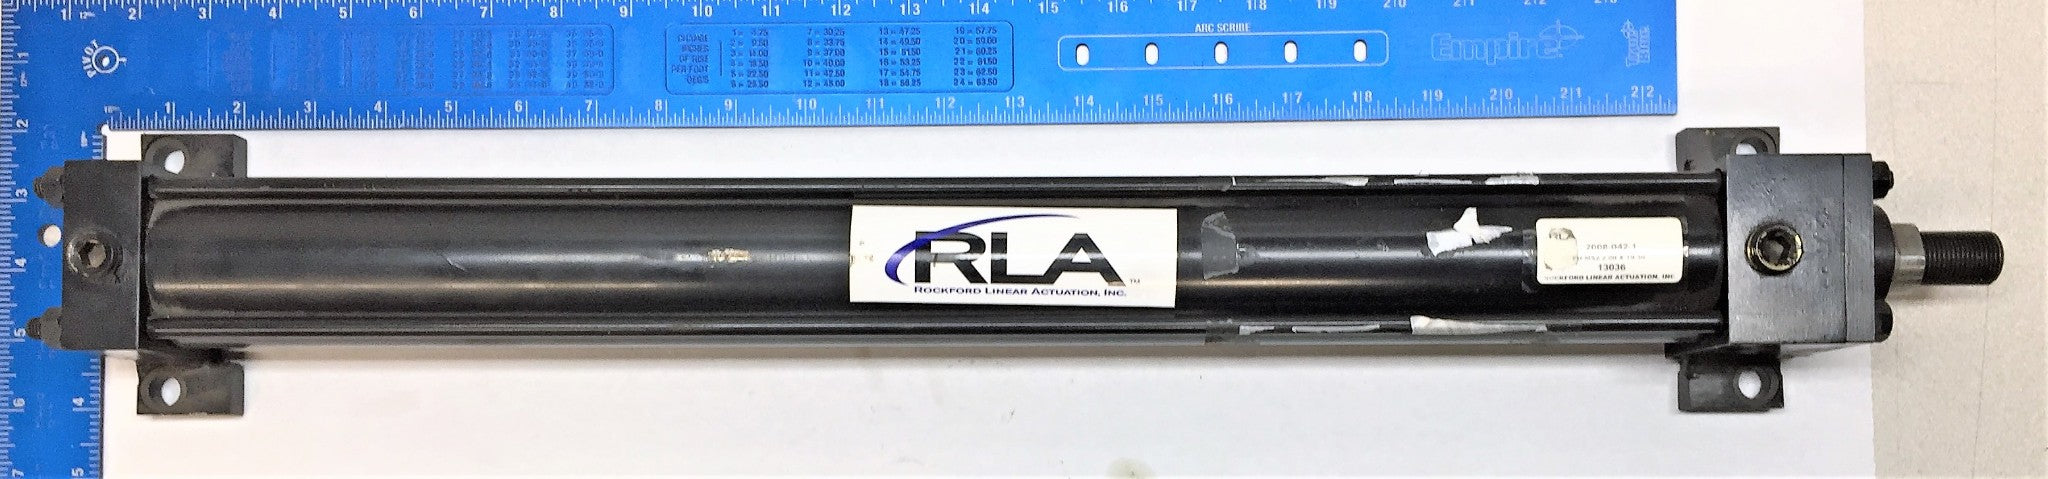 ROCKFORD LINEAR ACTUATION Hydraulic Cylinder PH-MS2-2.00X19.50 (13036) NOS